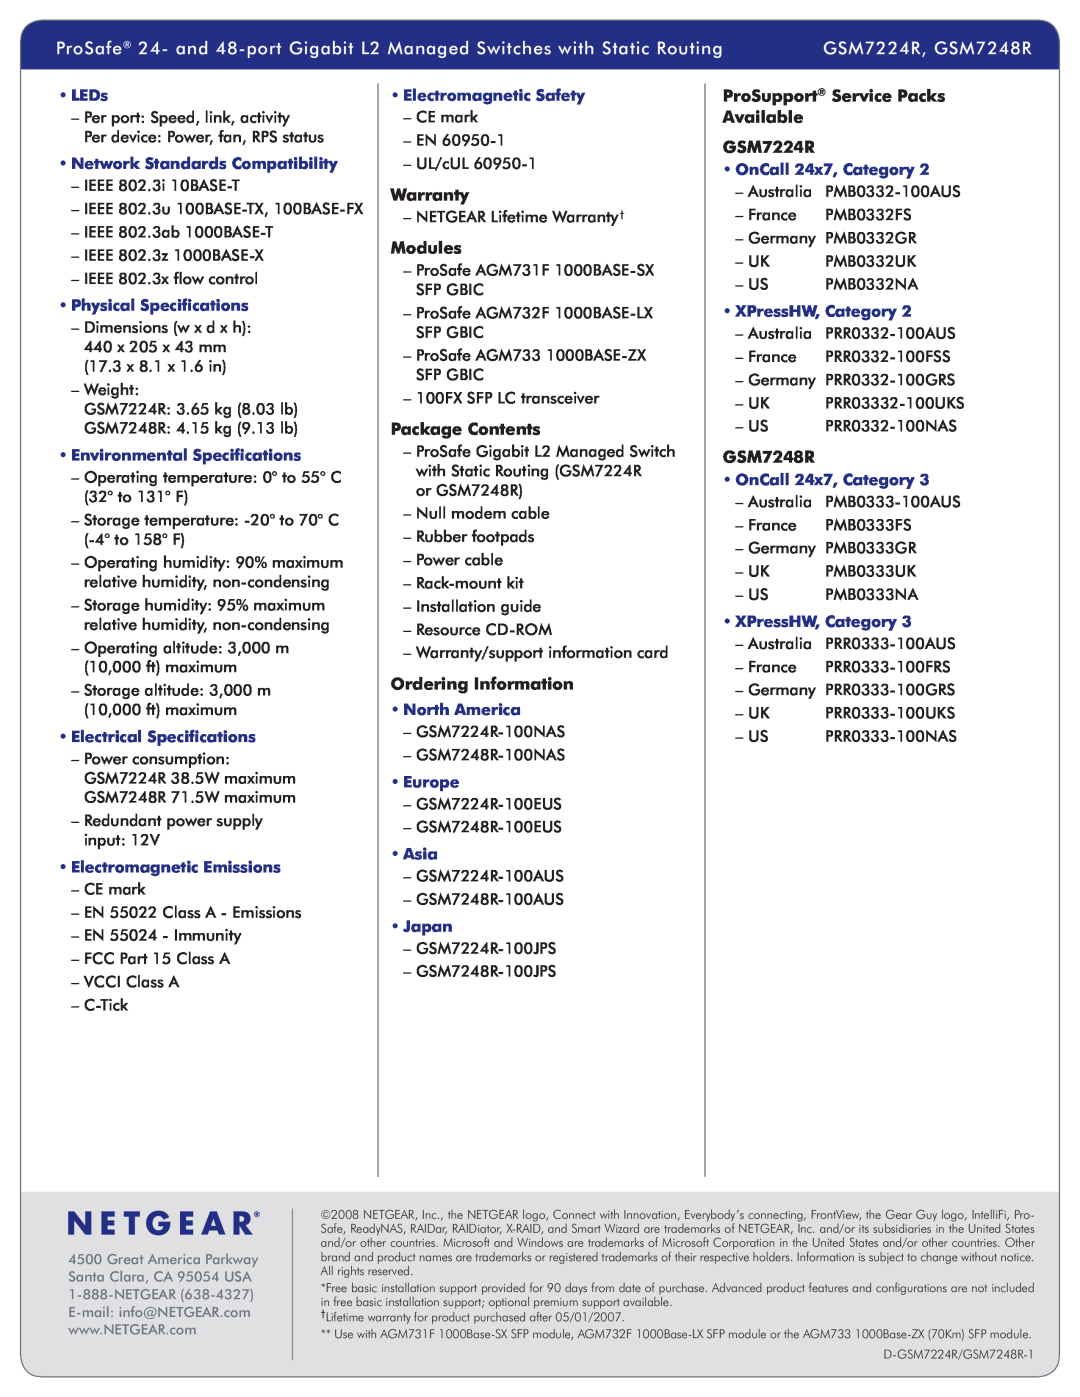 NETGEAR manual Warranty, Modules, Package Contents, Ordering Information, ProSupport Service Packs Available GSM7224R 